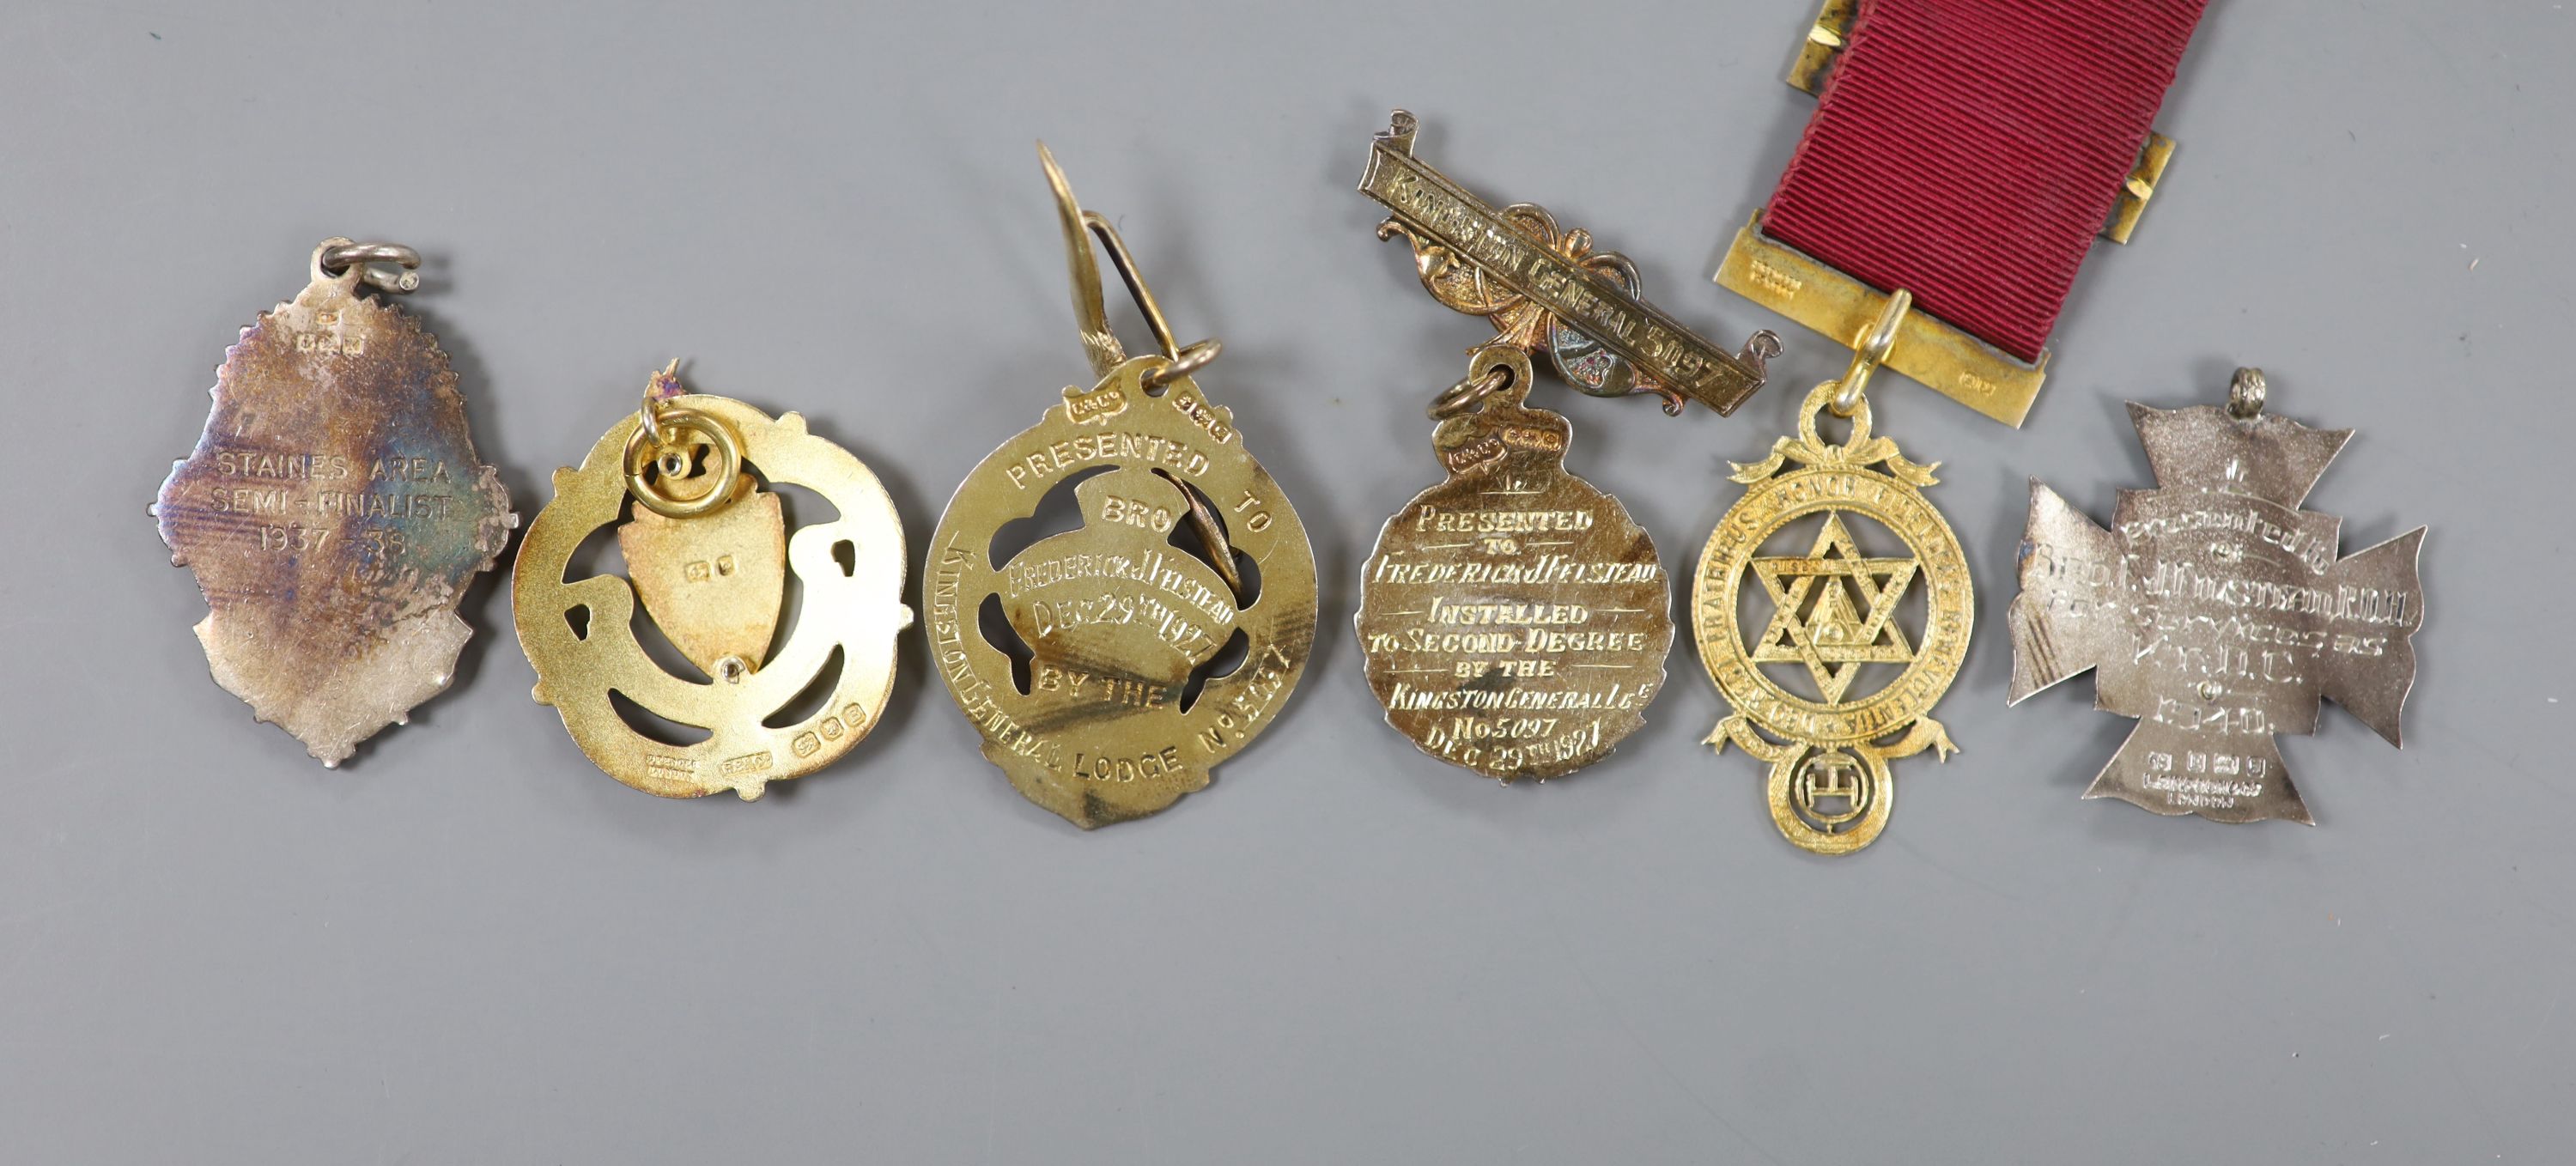 Six assorted silver or silver gilt masonic jewels, some with enamel.